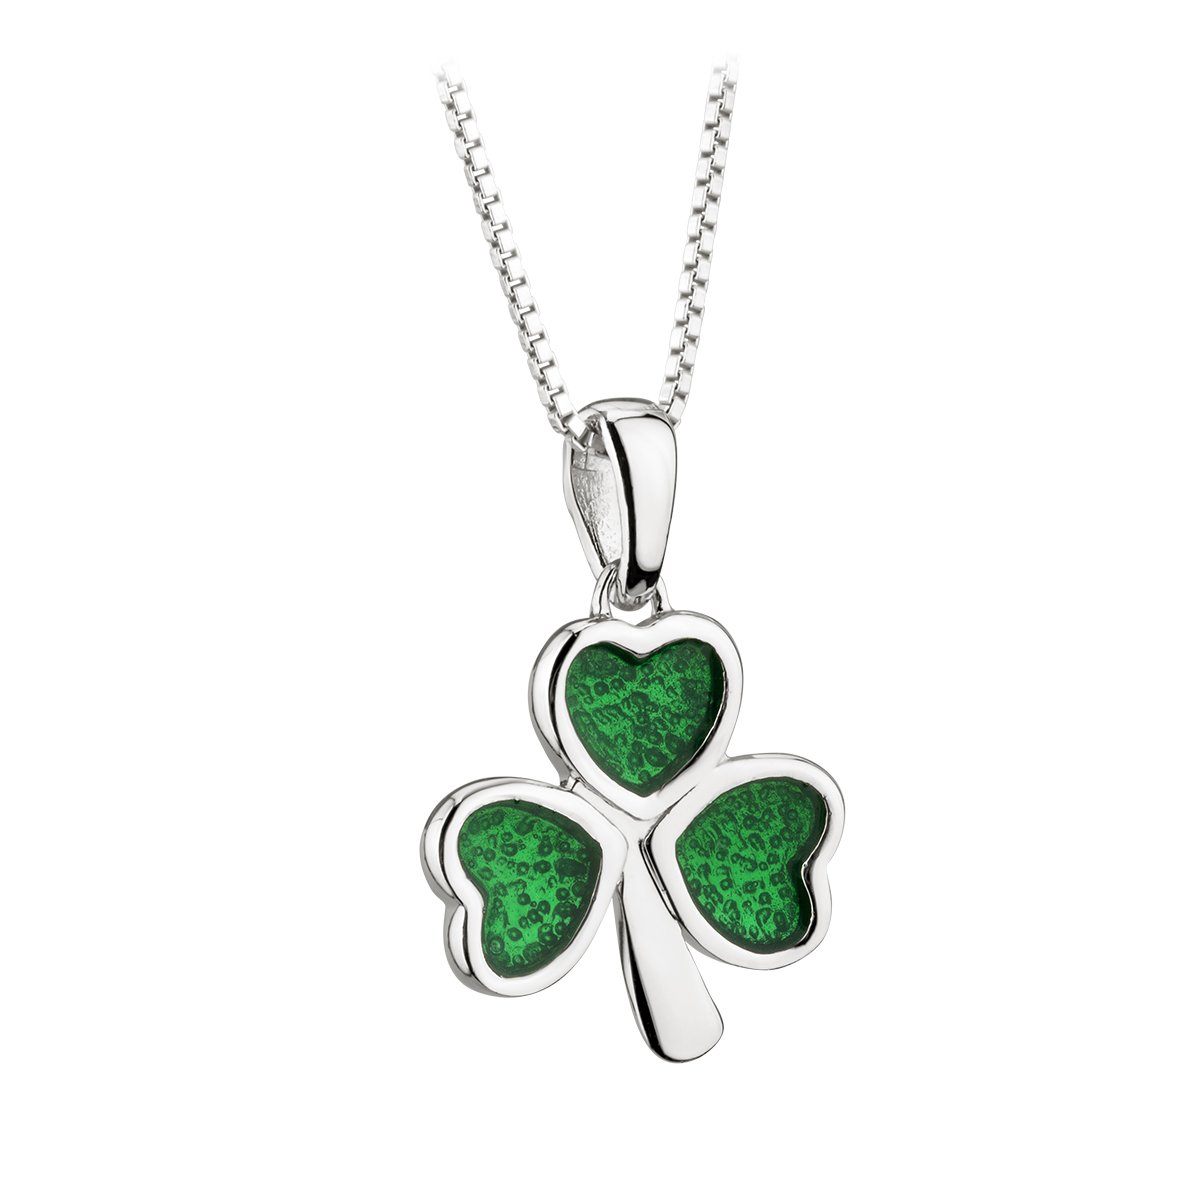 Unique Shamrock Pendant: Sterling Silver & Green Enamel, Crafted in Ireland